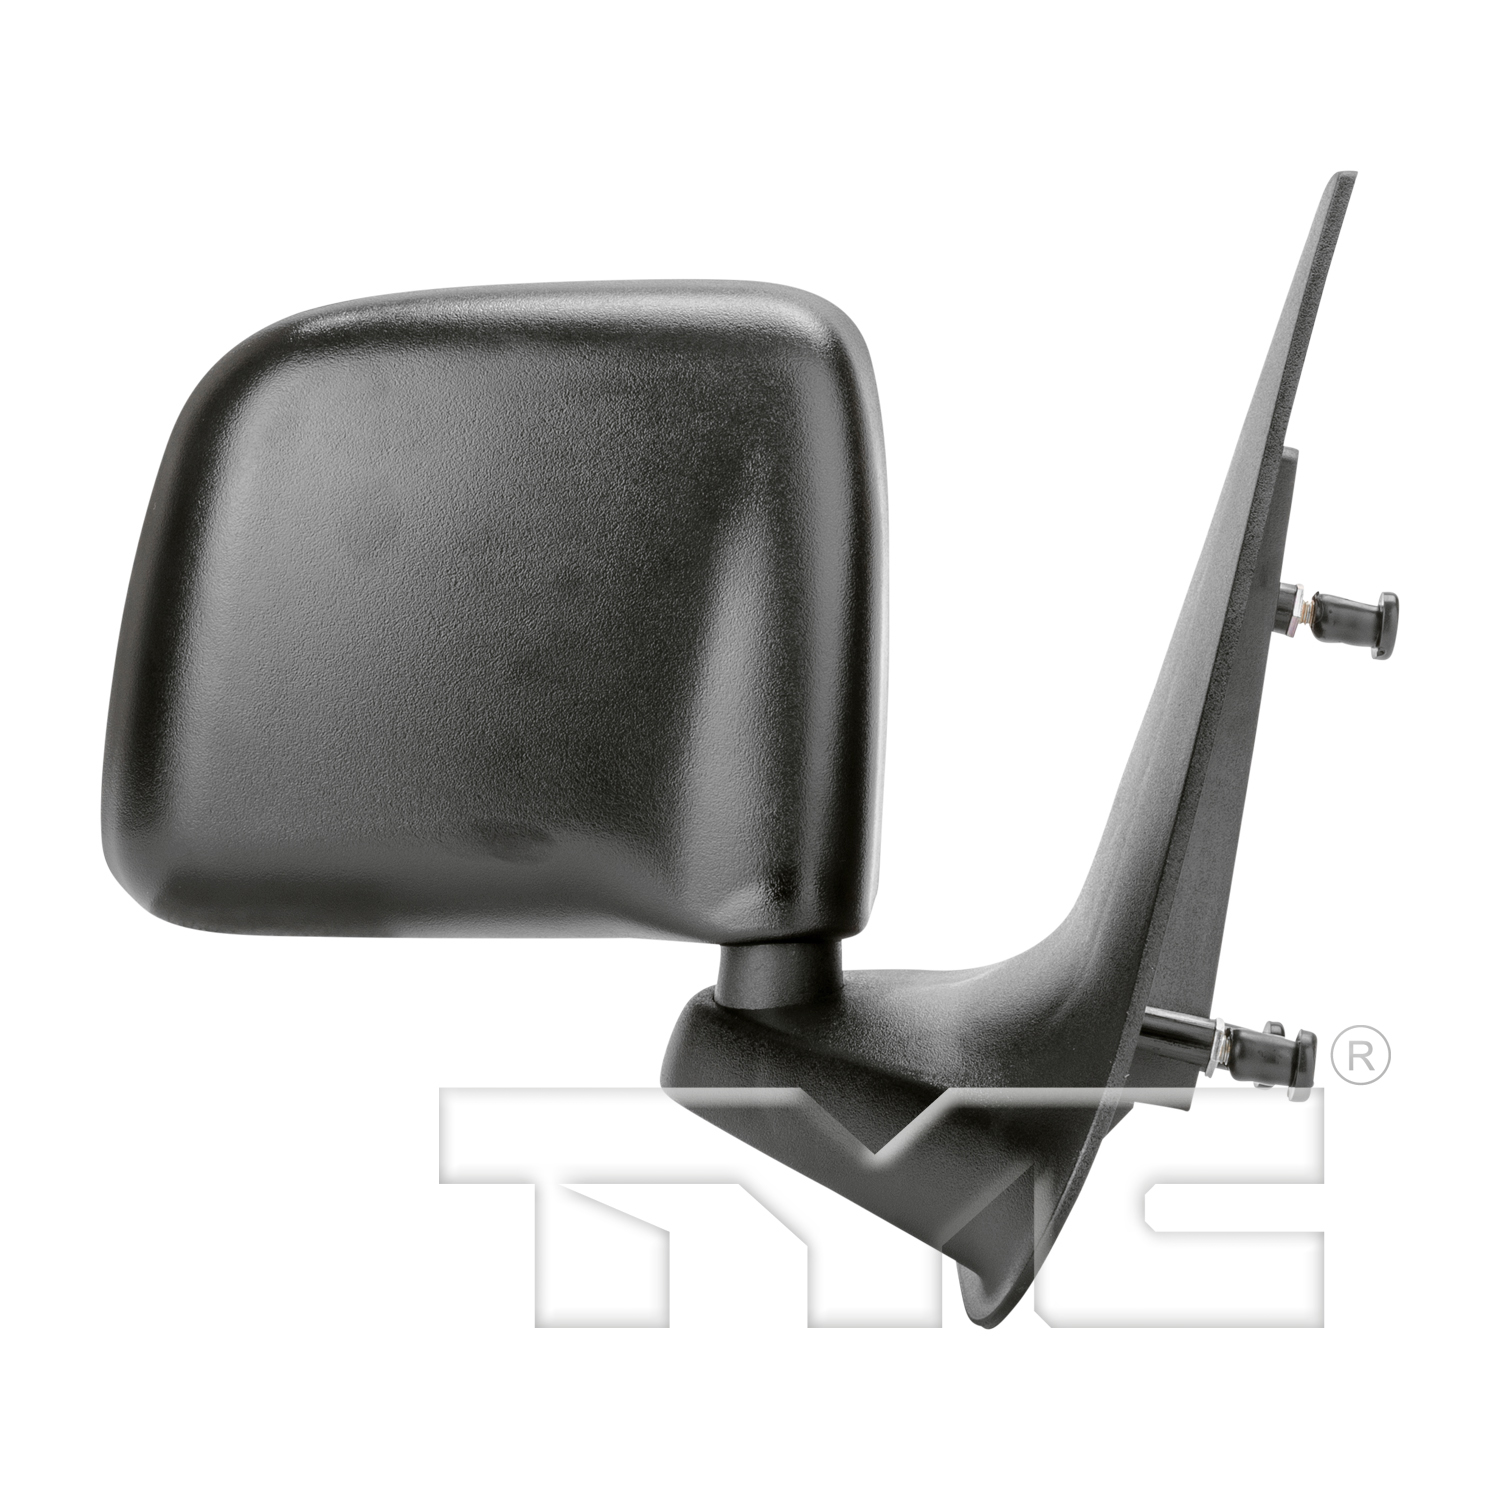 Aftermarket MIRRORS for MAZDA - B2300, B2300,94-97,RT Mirror outside rear view